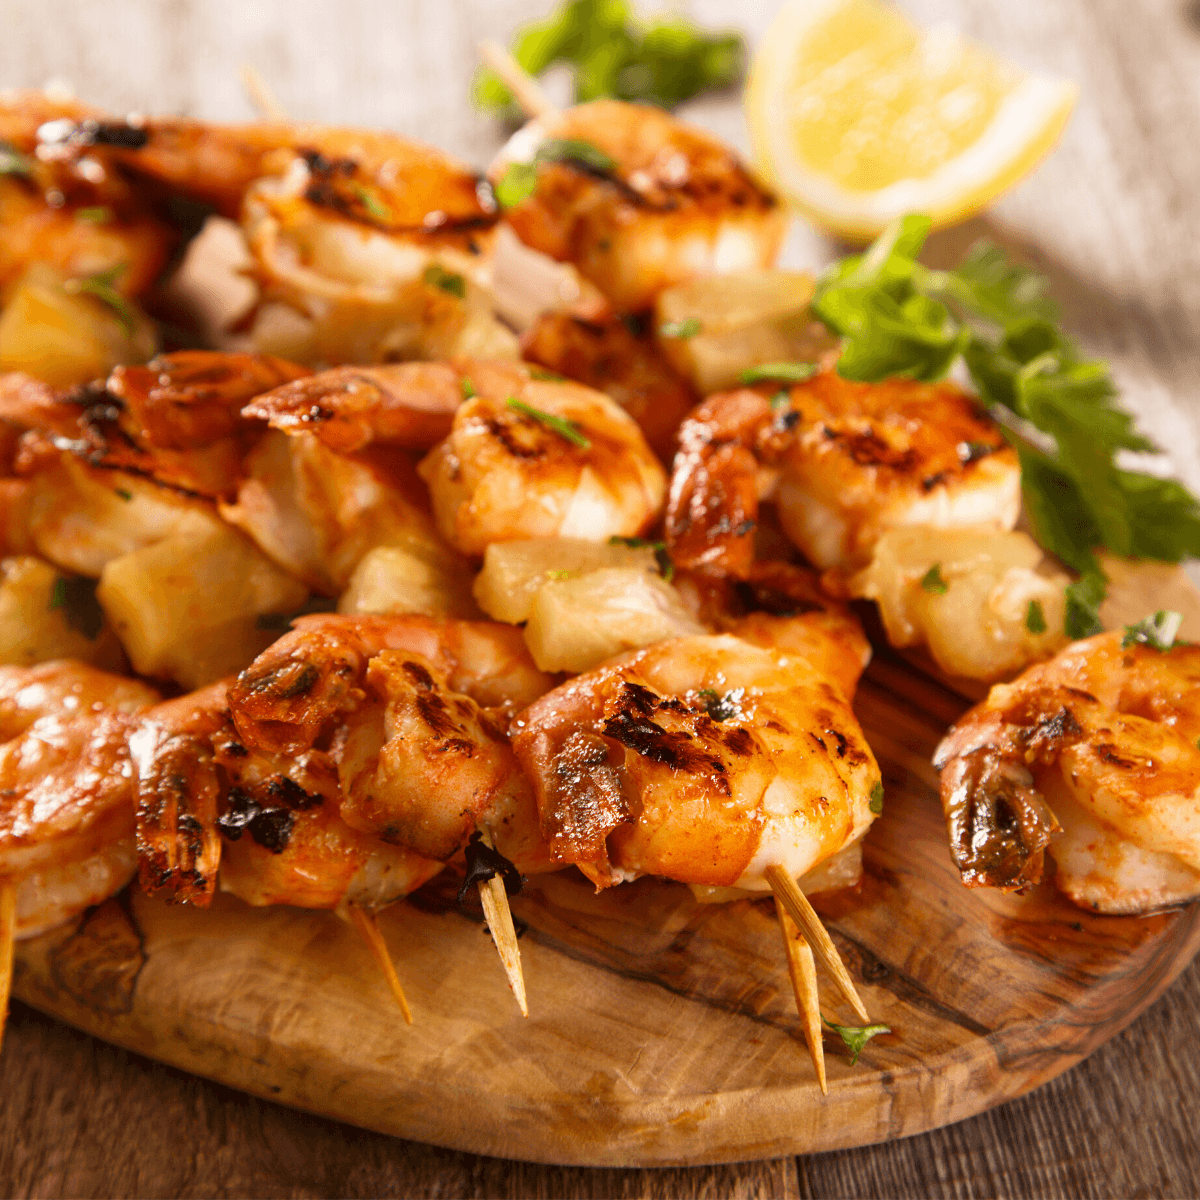 Skewered grilled shrimp with parsley and lemon on wooden board. 